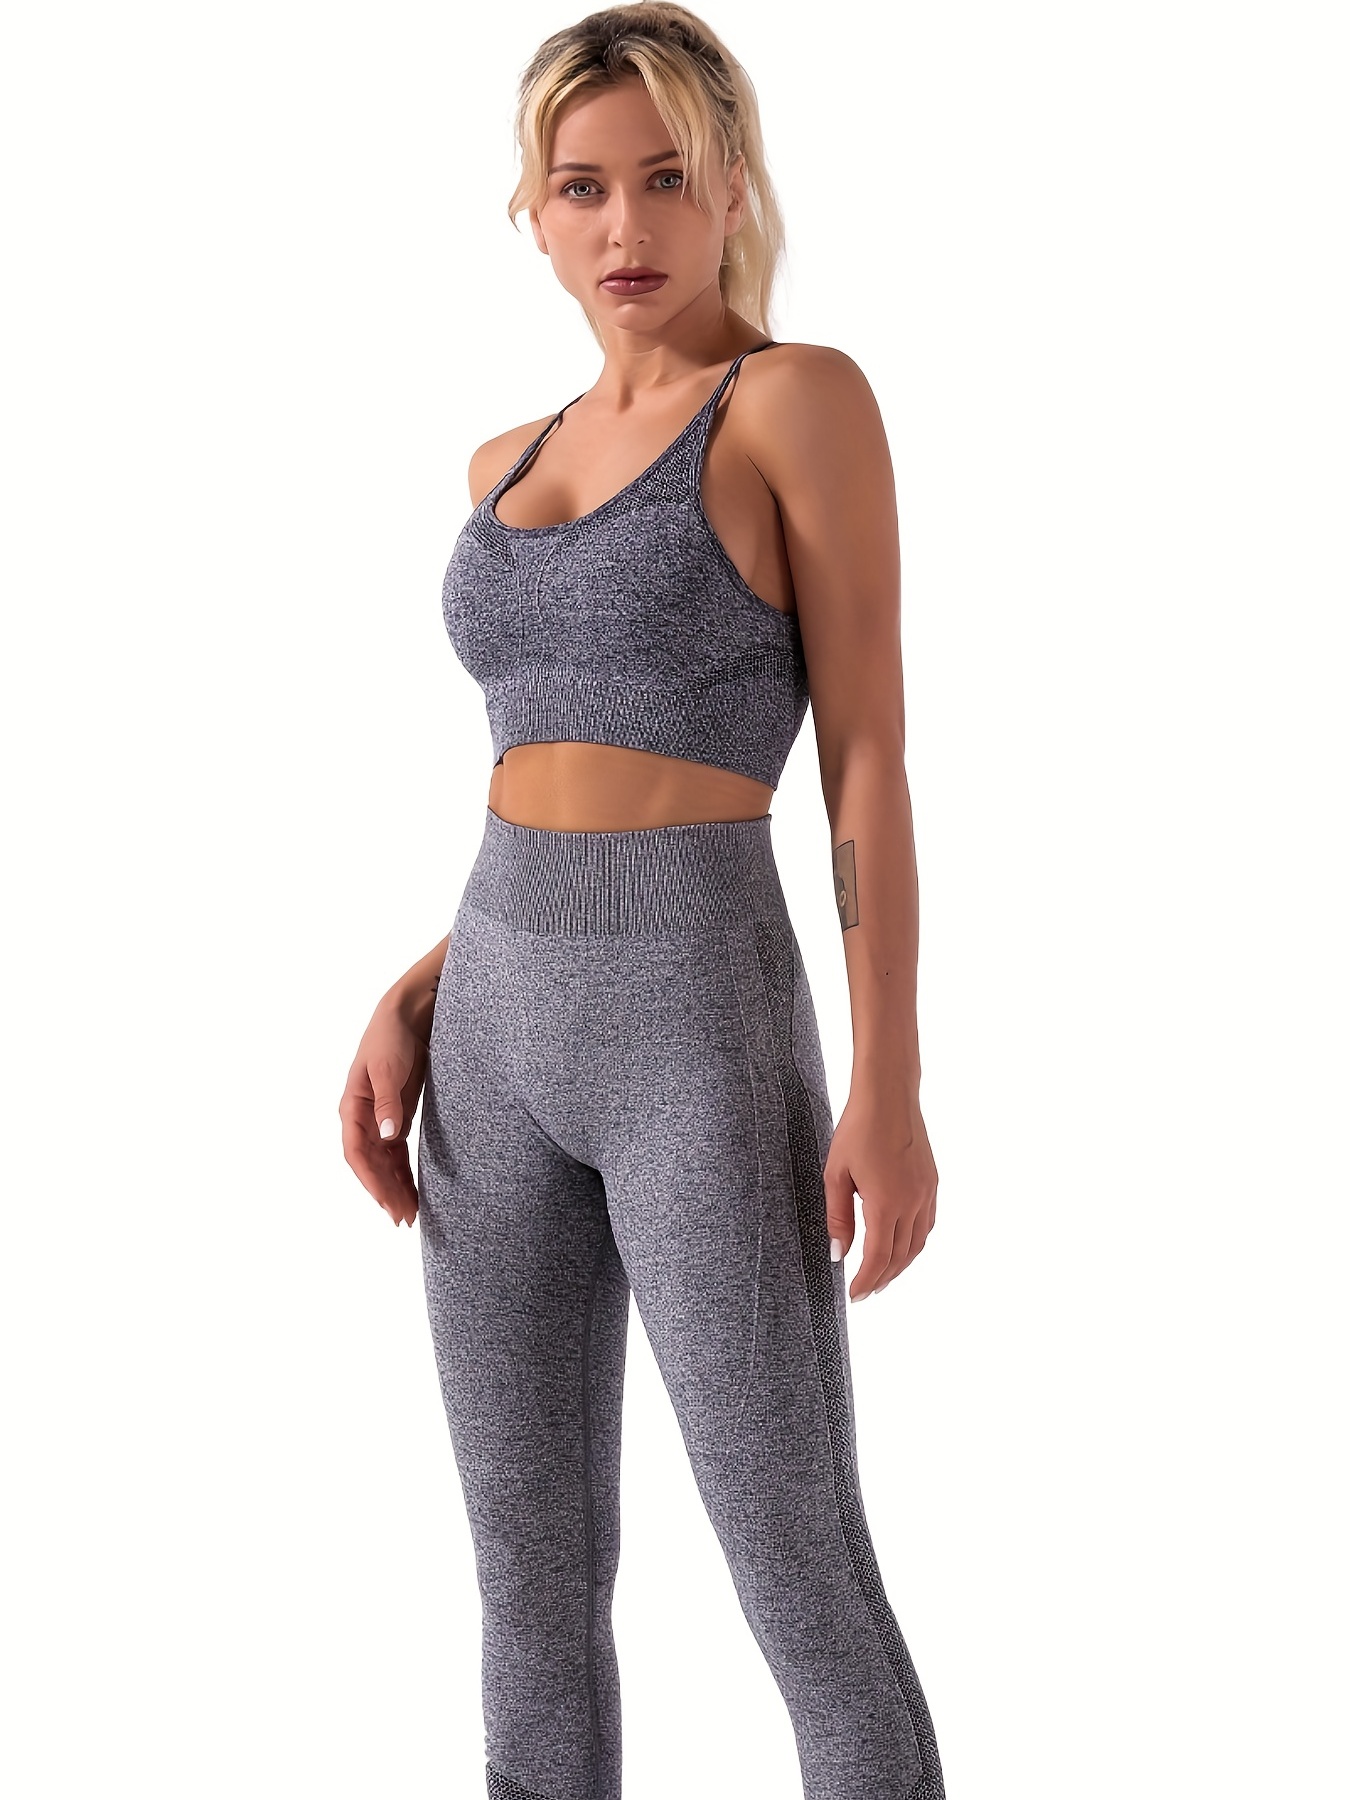 Women’s Athletic Two Piece Set Leggings And Top Yoga Workout Active Wear